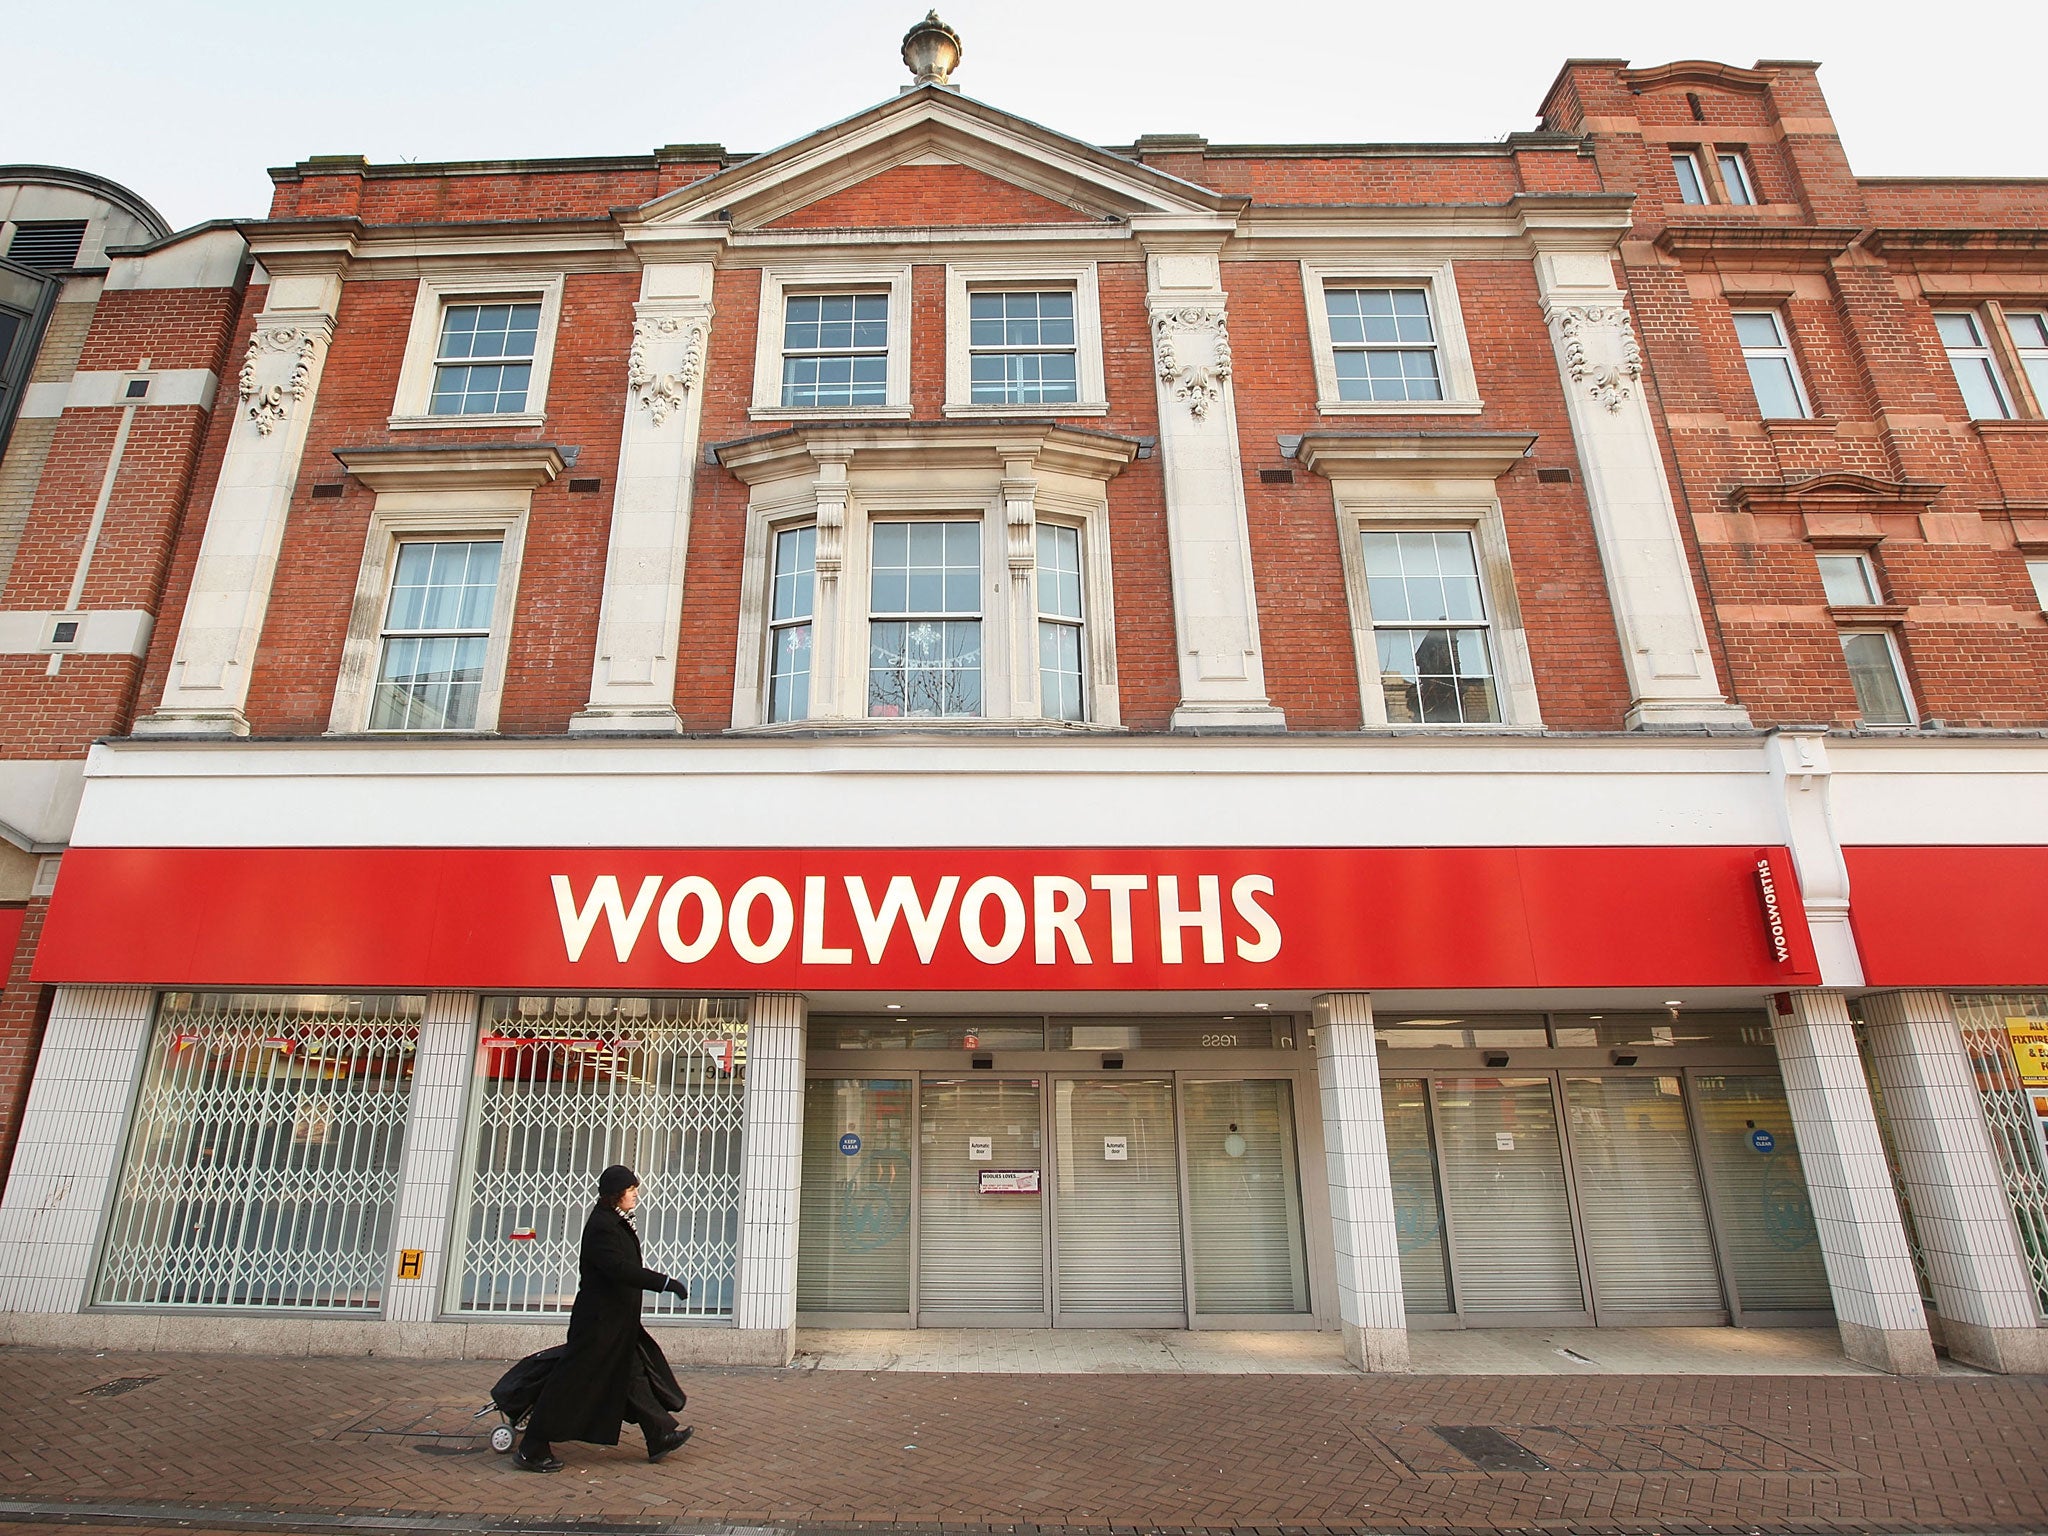 Woolworths closed its doors for the last time in 2009